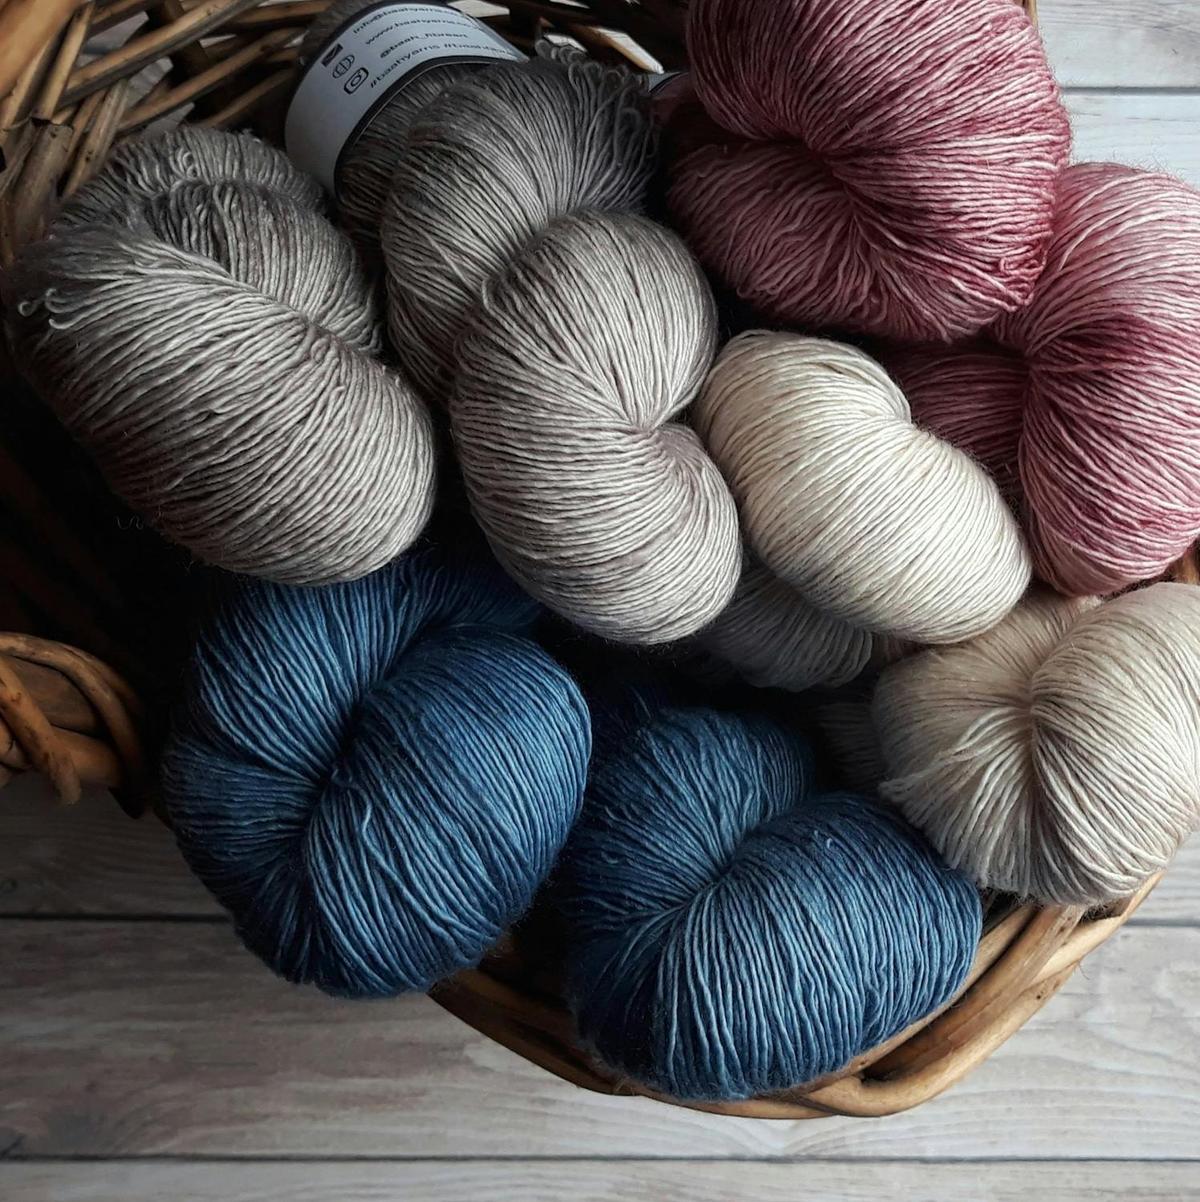 The yarn size is a good indication of how well-crafted your sweater is. (Surene Palvie/Pexels)